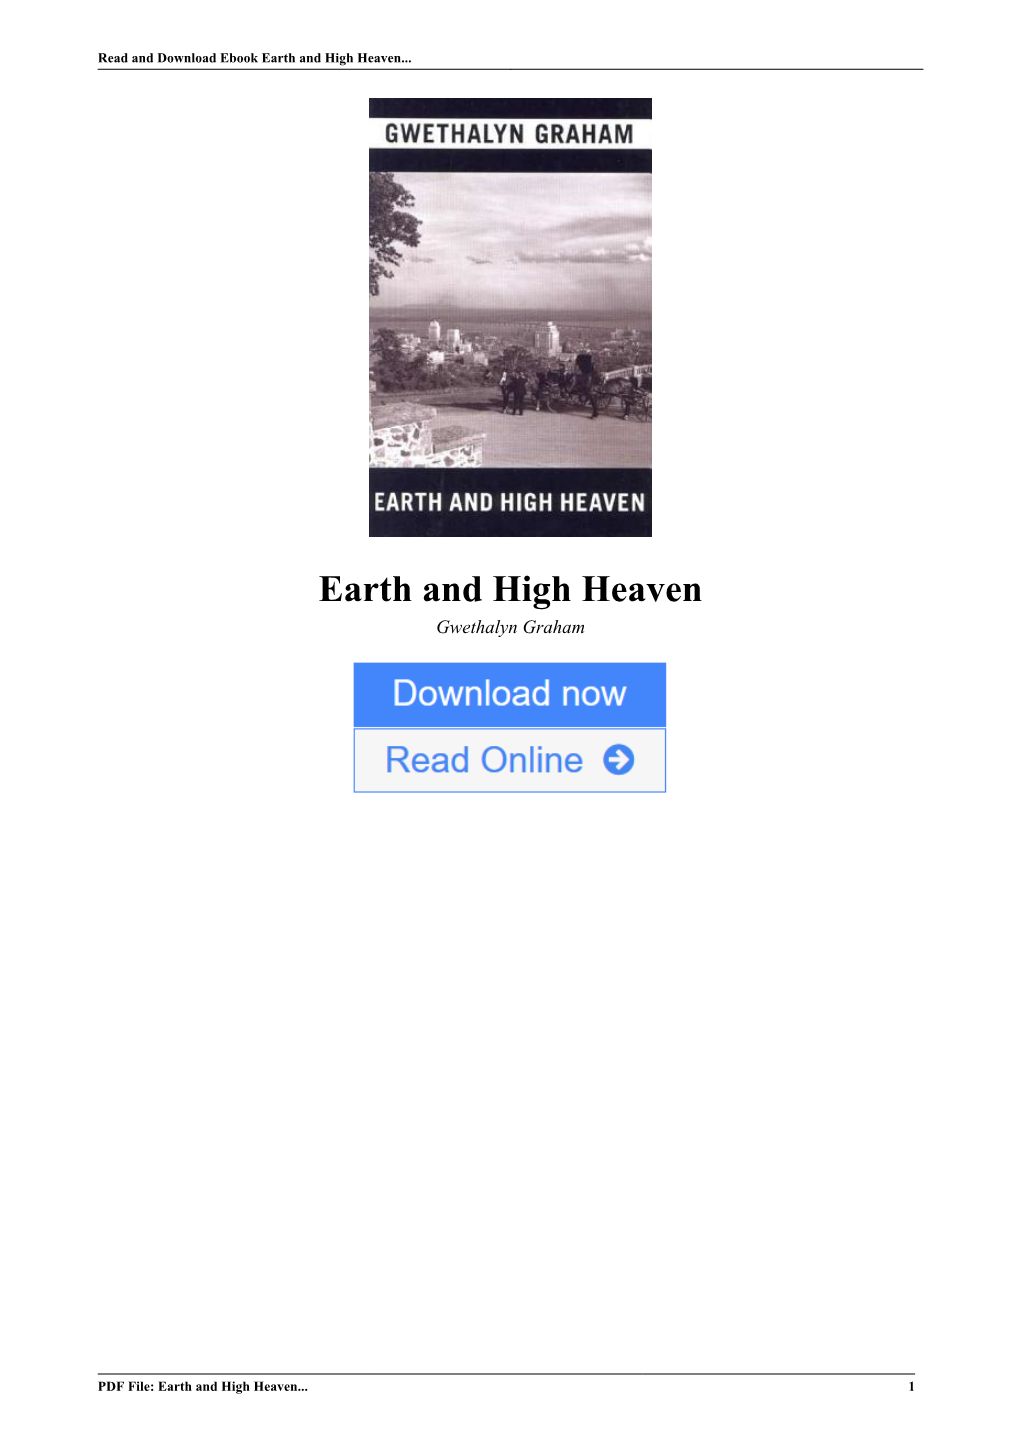 Earth and High Heaven by Gwethalyn Graham